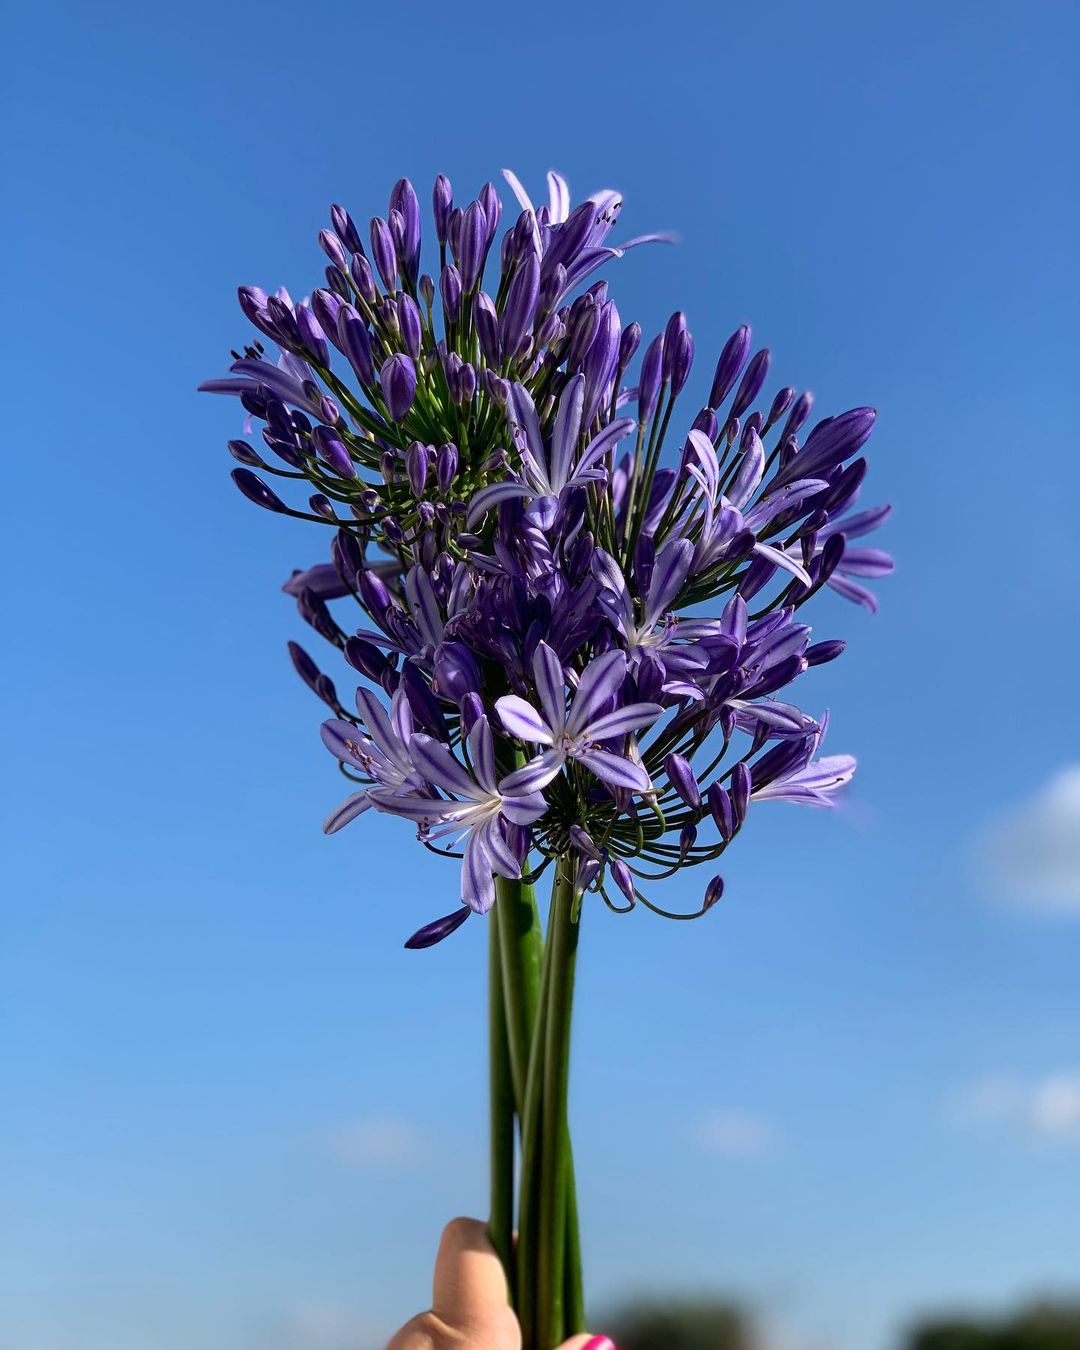 Agapanthus - The Flower of Love005